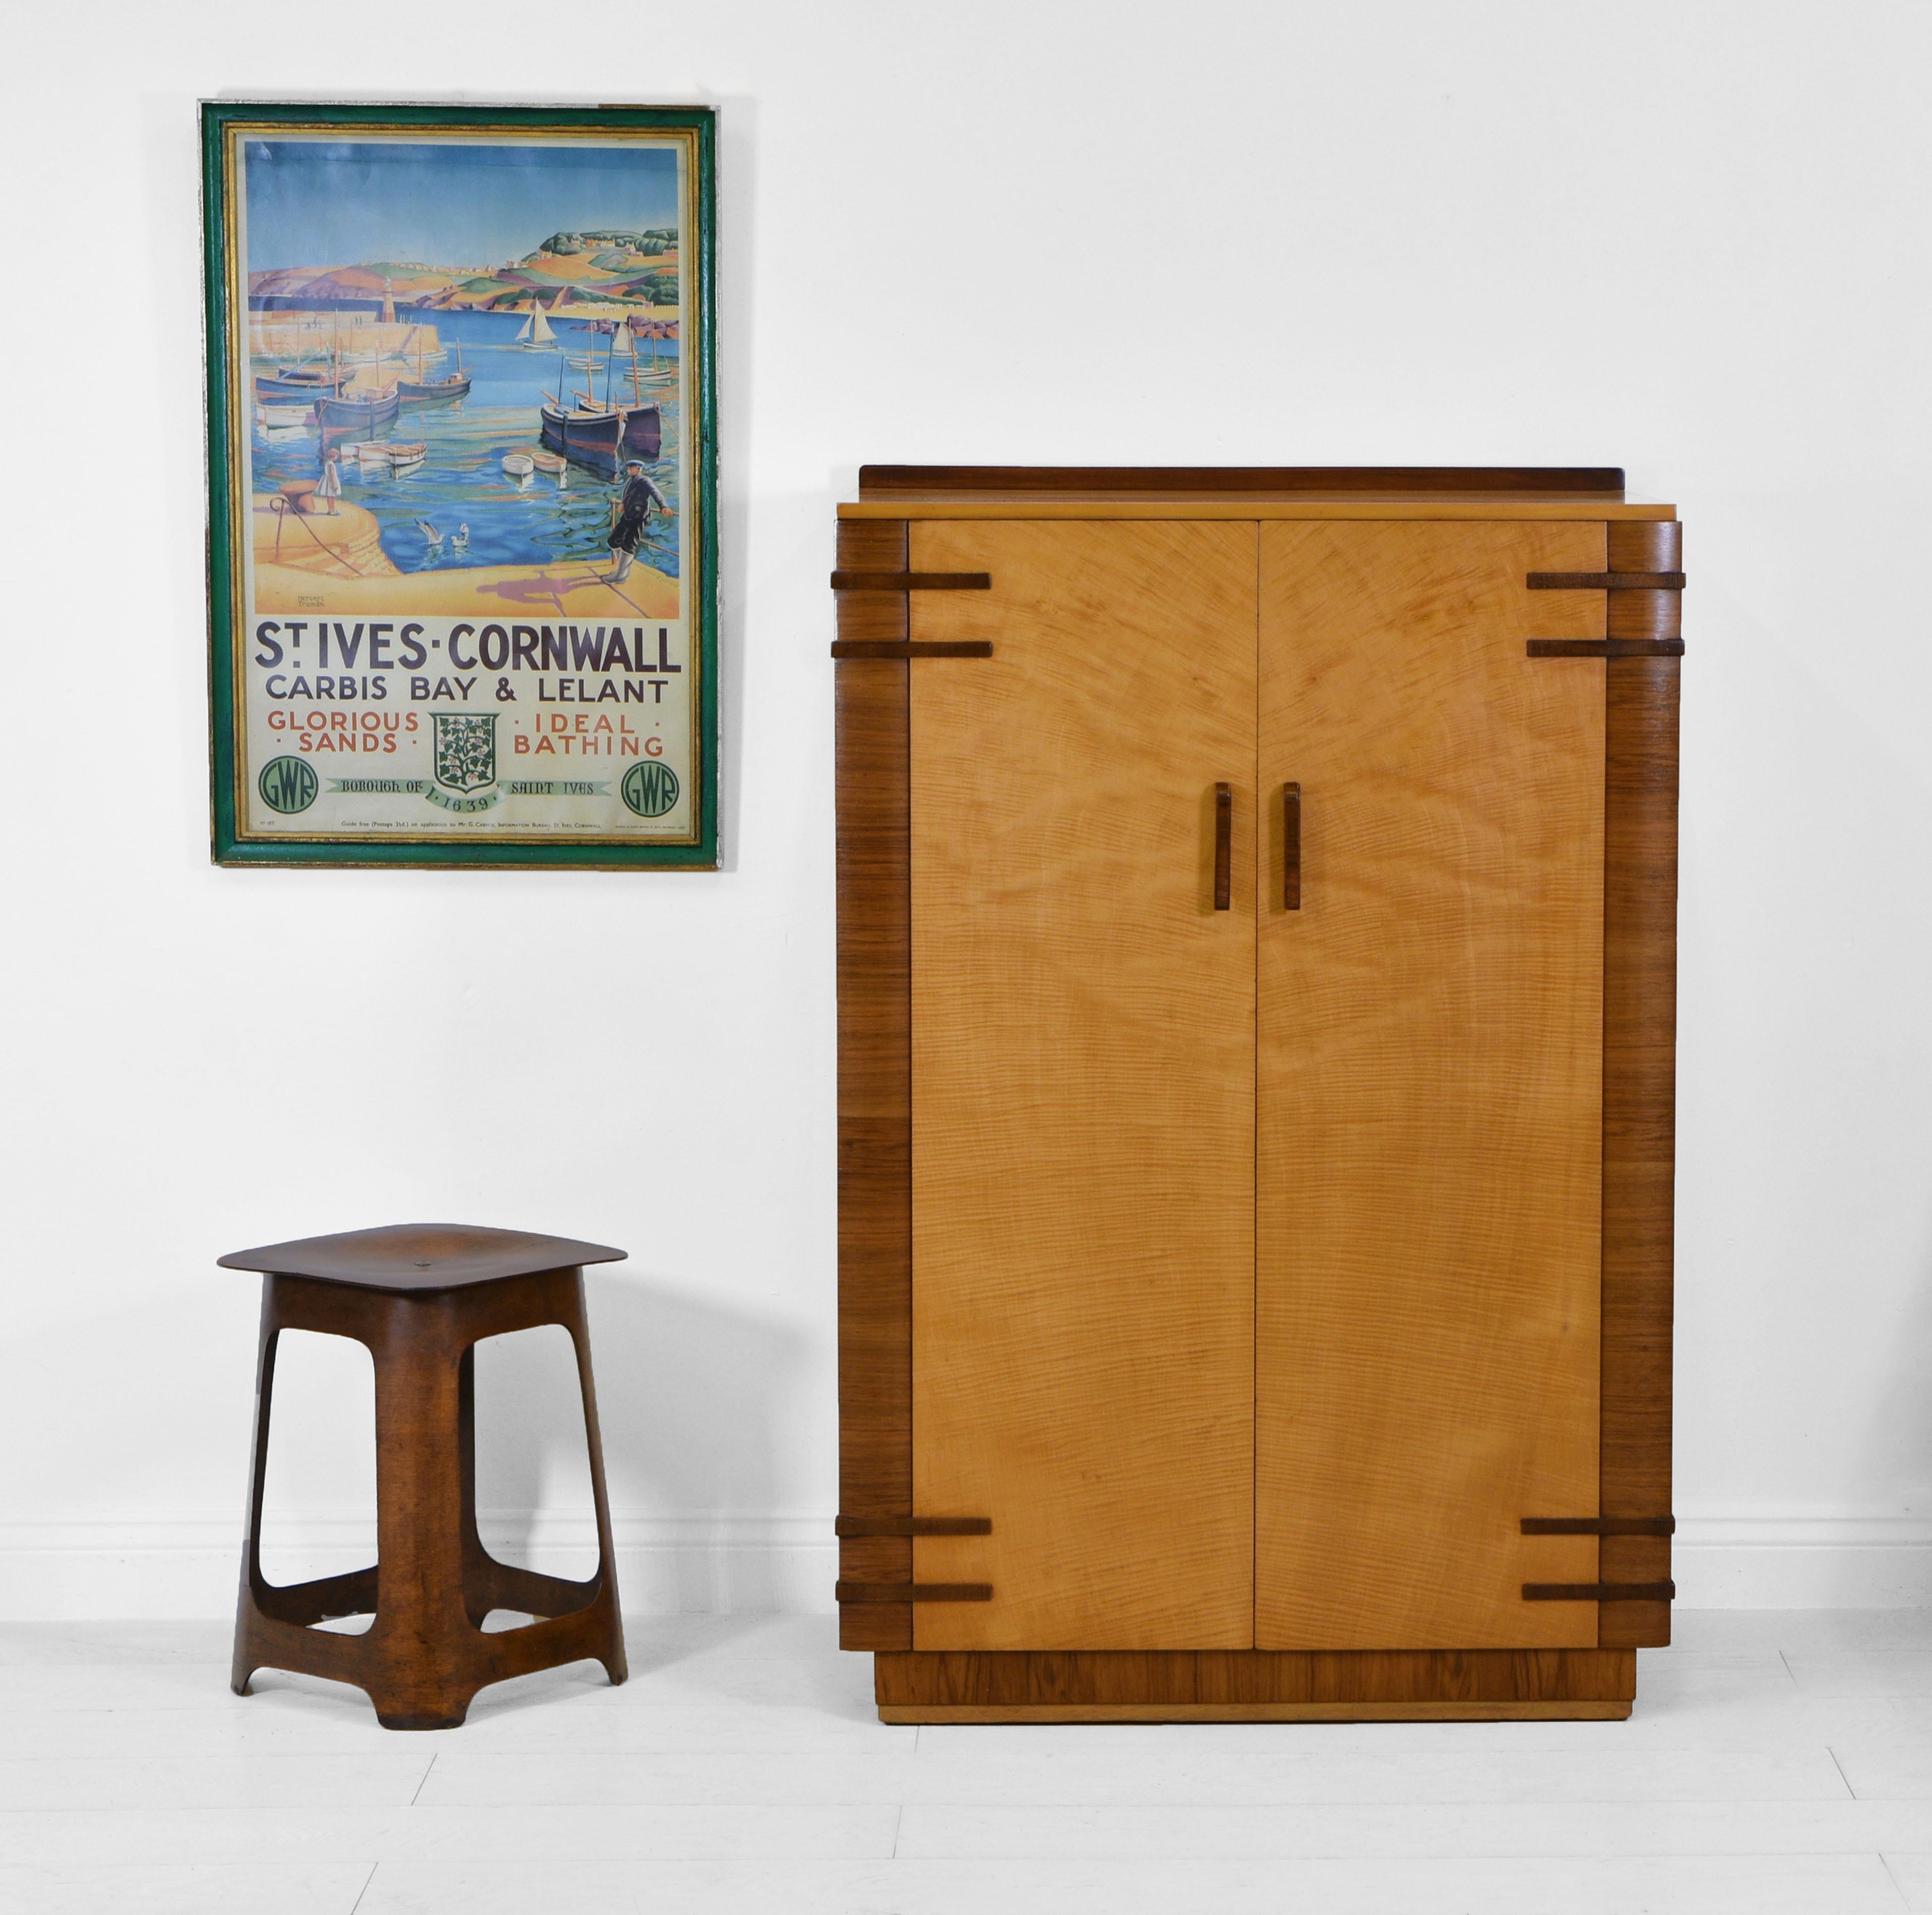 A stylish English Art Deco maple and contrasting walnut compact wardrobe/tallboy. Circa 1930.

*Free delivery for all areas in mainland England & Wales only. Delivery to room of choice by a two person team. Items are left packed. Return costs are